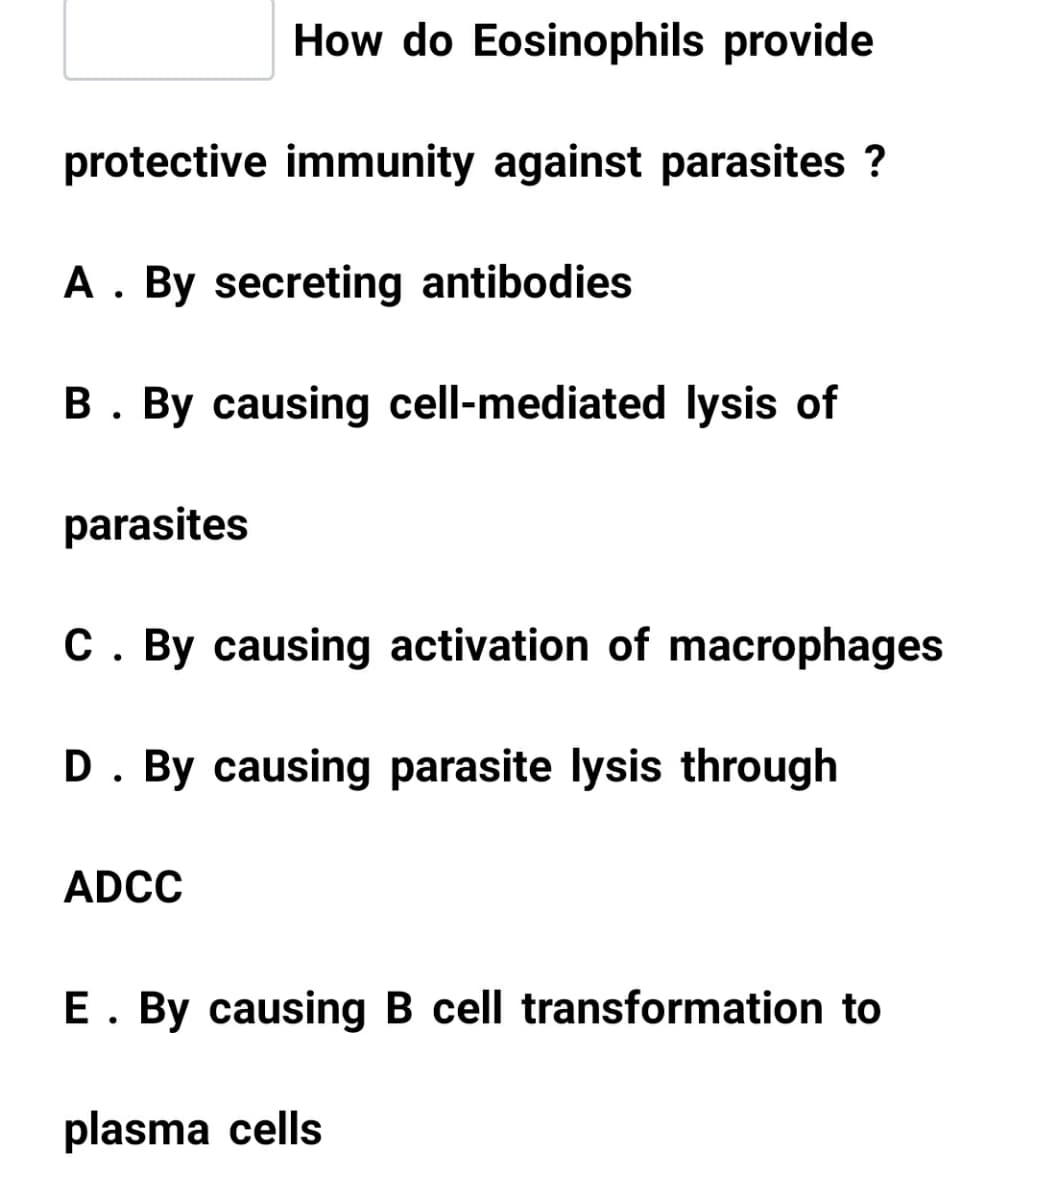 How do Eosinophils provide
protective immunity against parasites ?
A. By secreting antibodies
B. By causing cell-mediated lysis of
parasites
C. By causing activation of macrophages
D. By causing parasite lysis through
ADCC
E. By causing B cell transformation to
plasma cells
